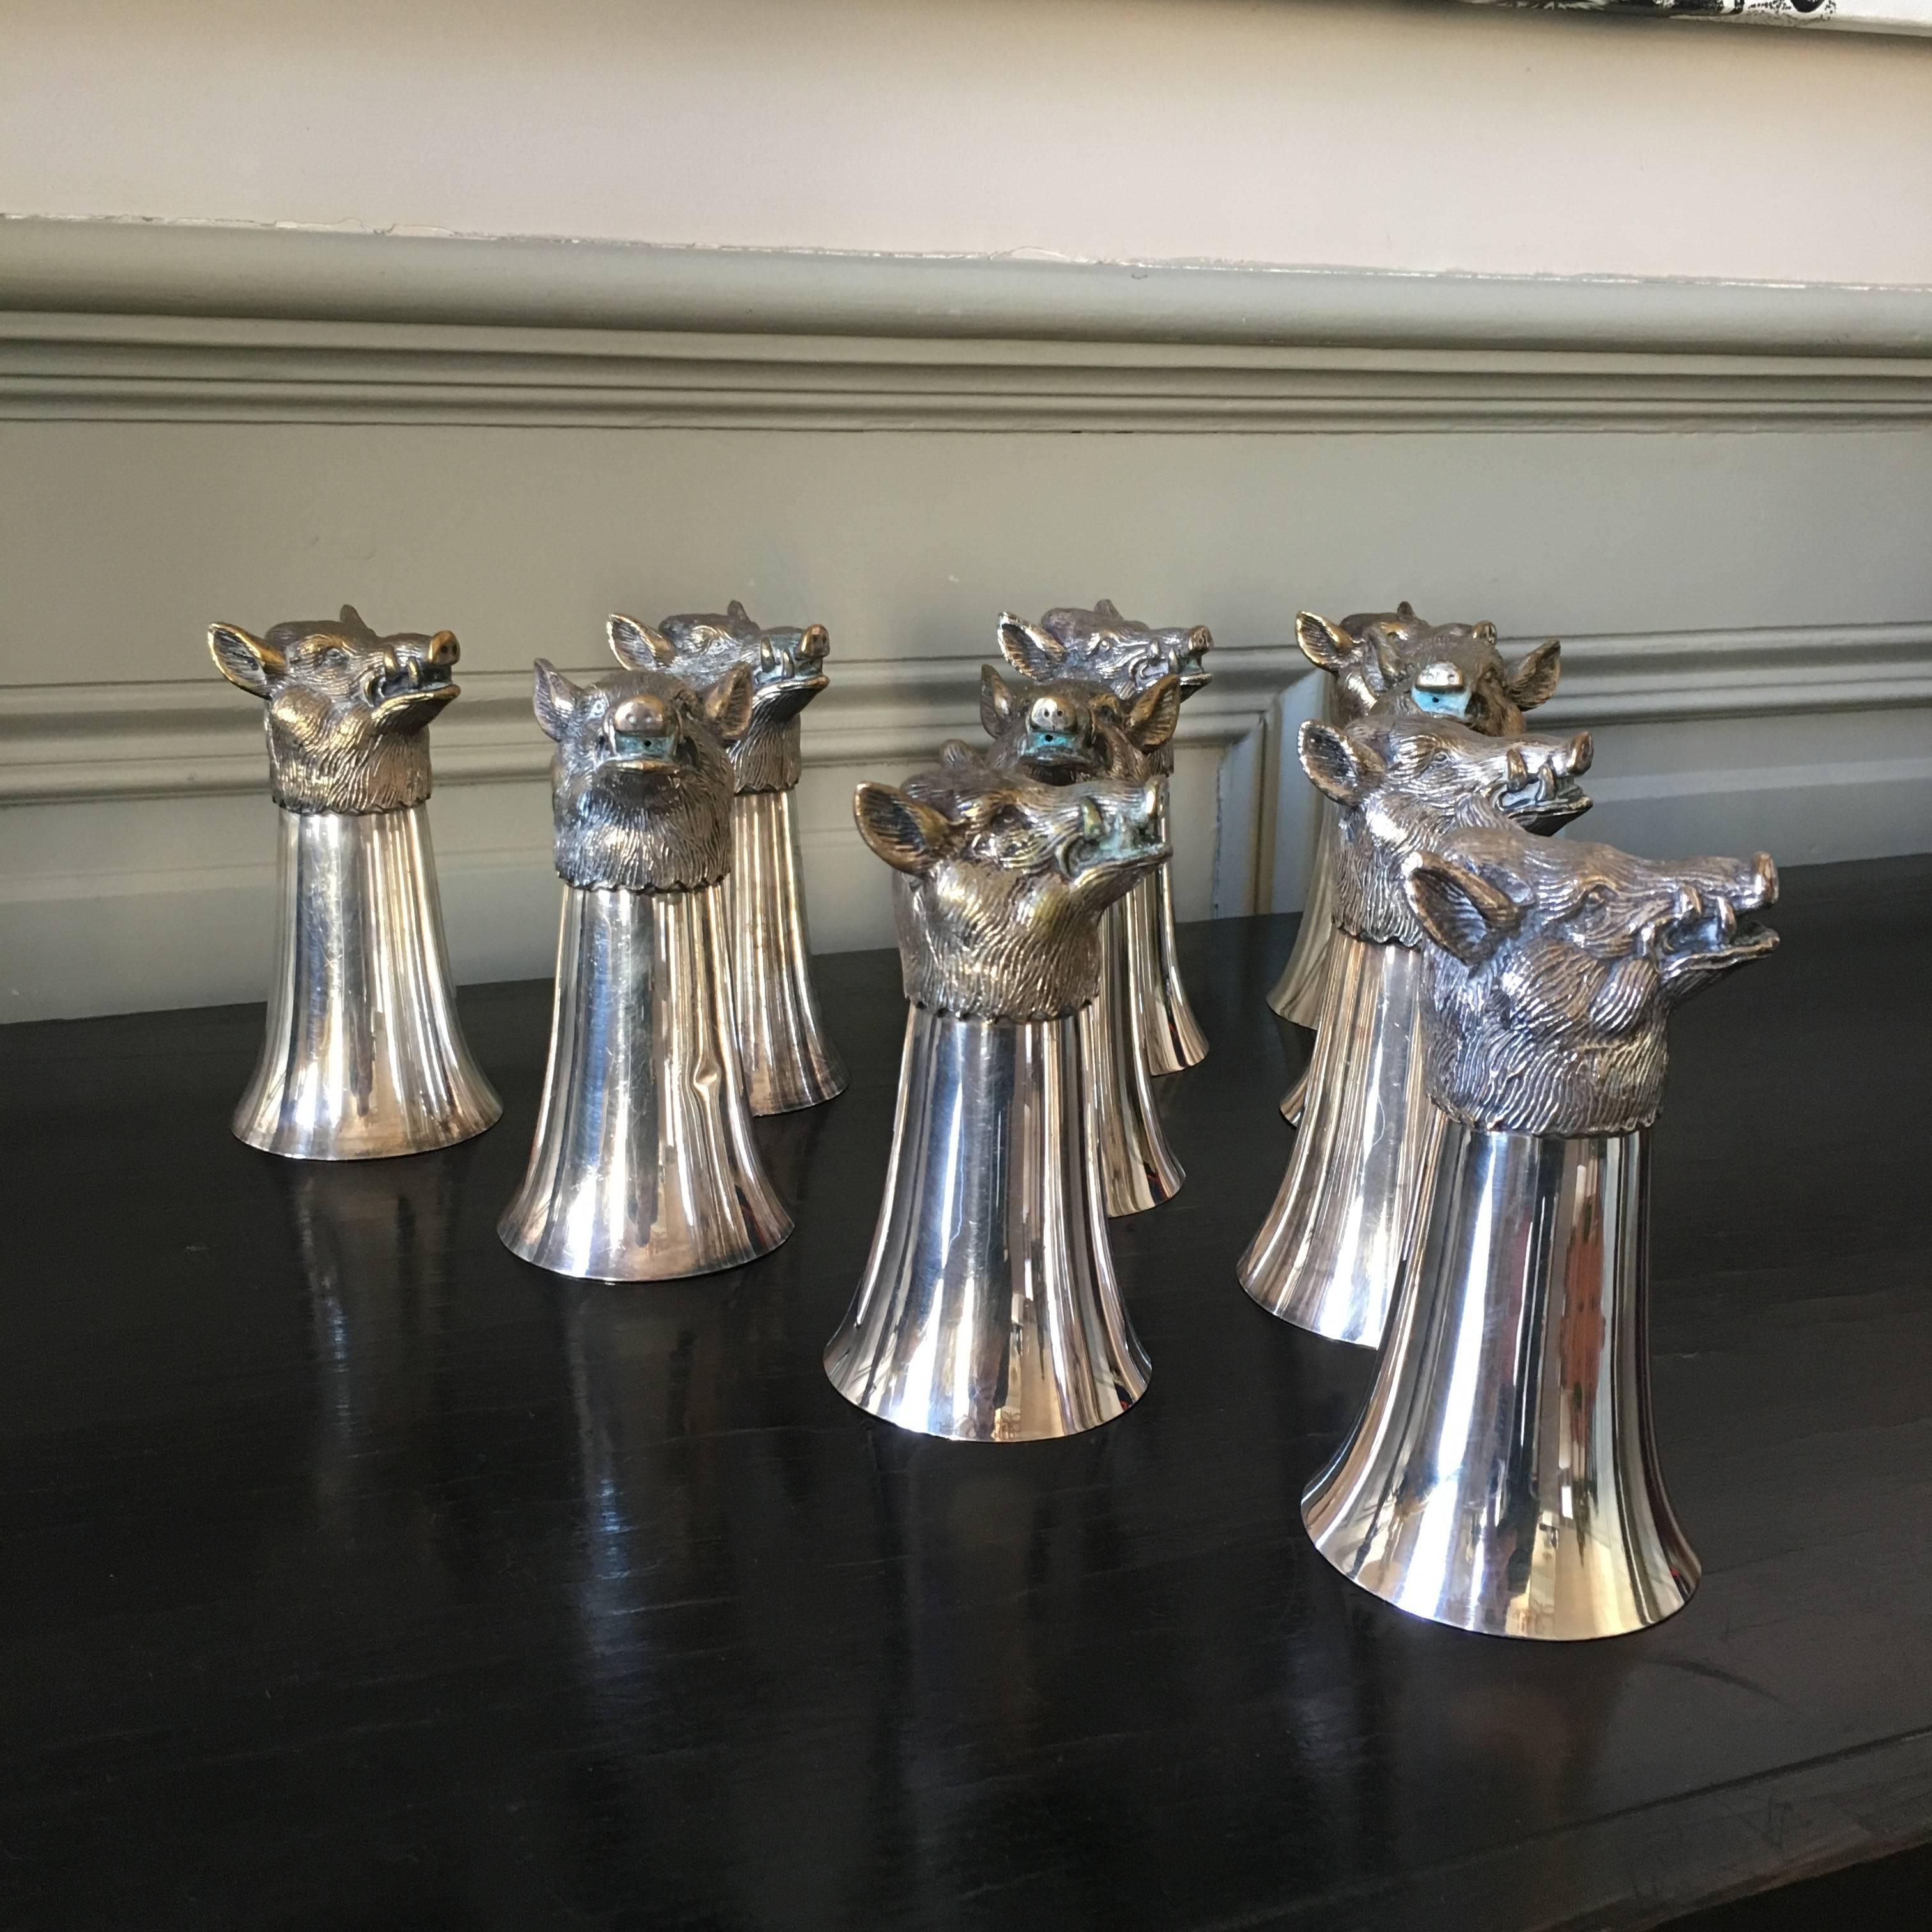 Rare and impressive set of ten silver plated cups with boars head.
Manufactured in Spain by Valenti, circa 1950.
Please note that we have the matching decanter in our listing.